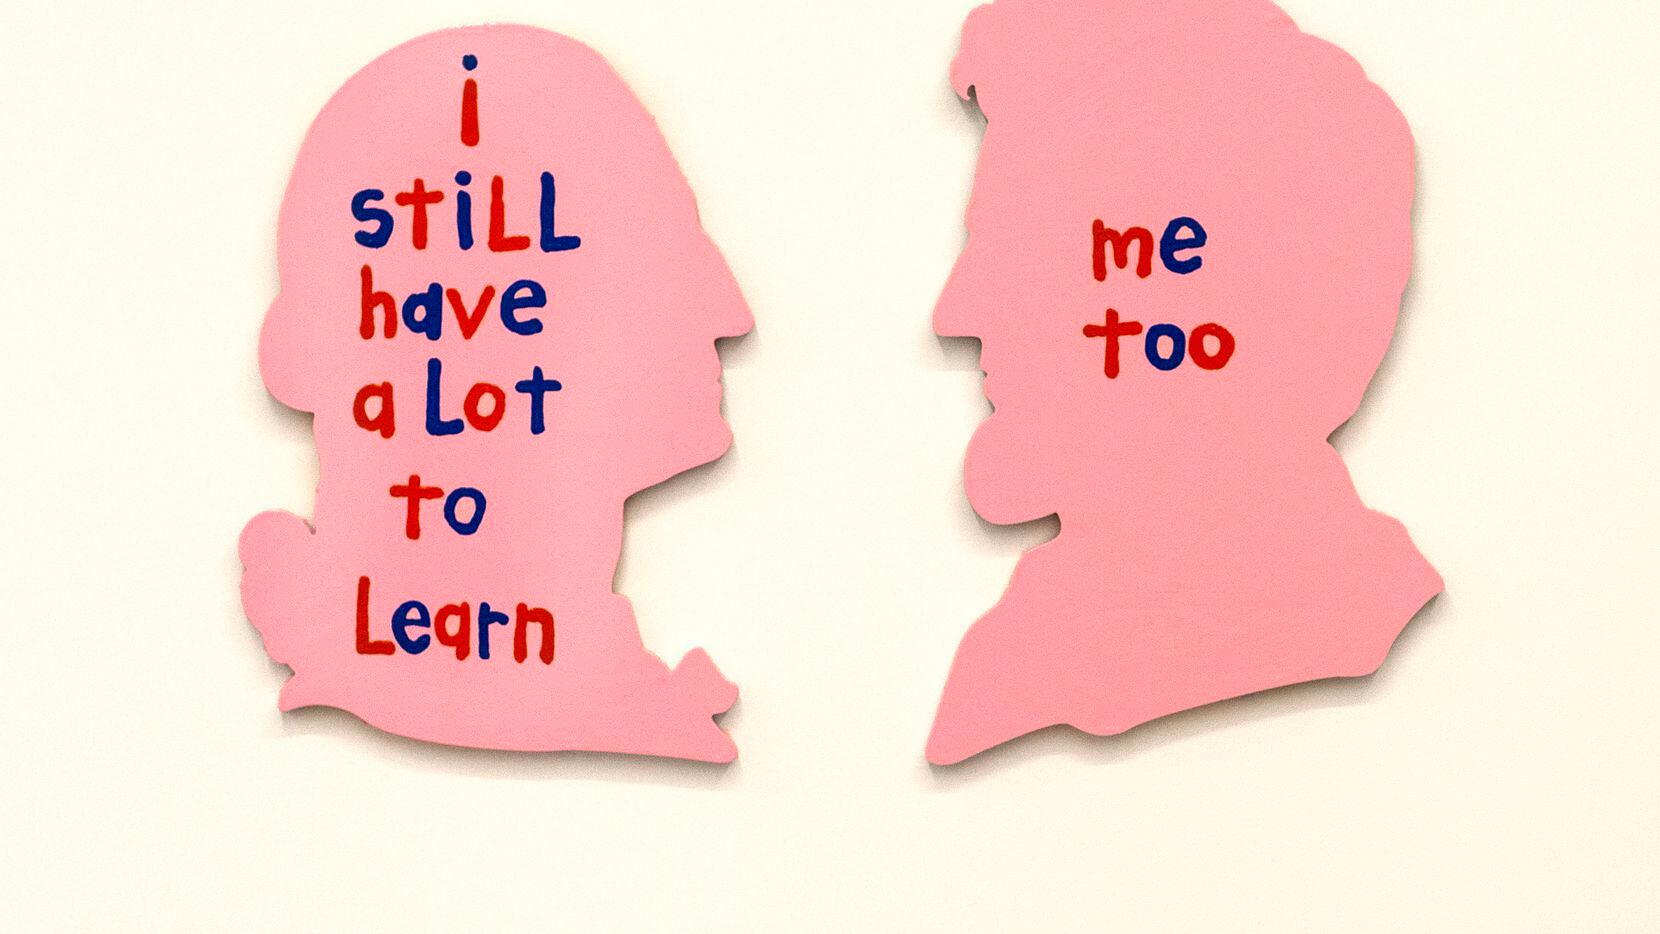 The piece "I Still Have a Lot to Learn, Me too" (2019) by Cary Leibowitz is on display at...